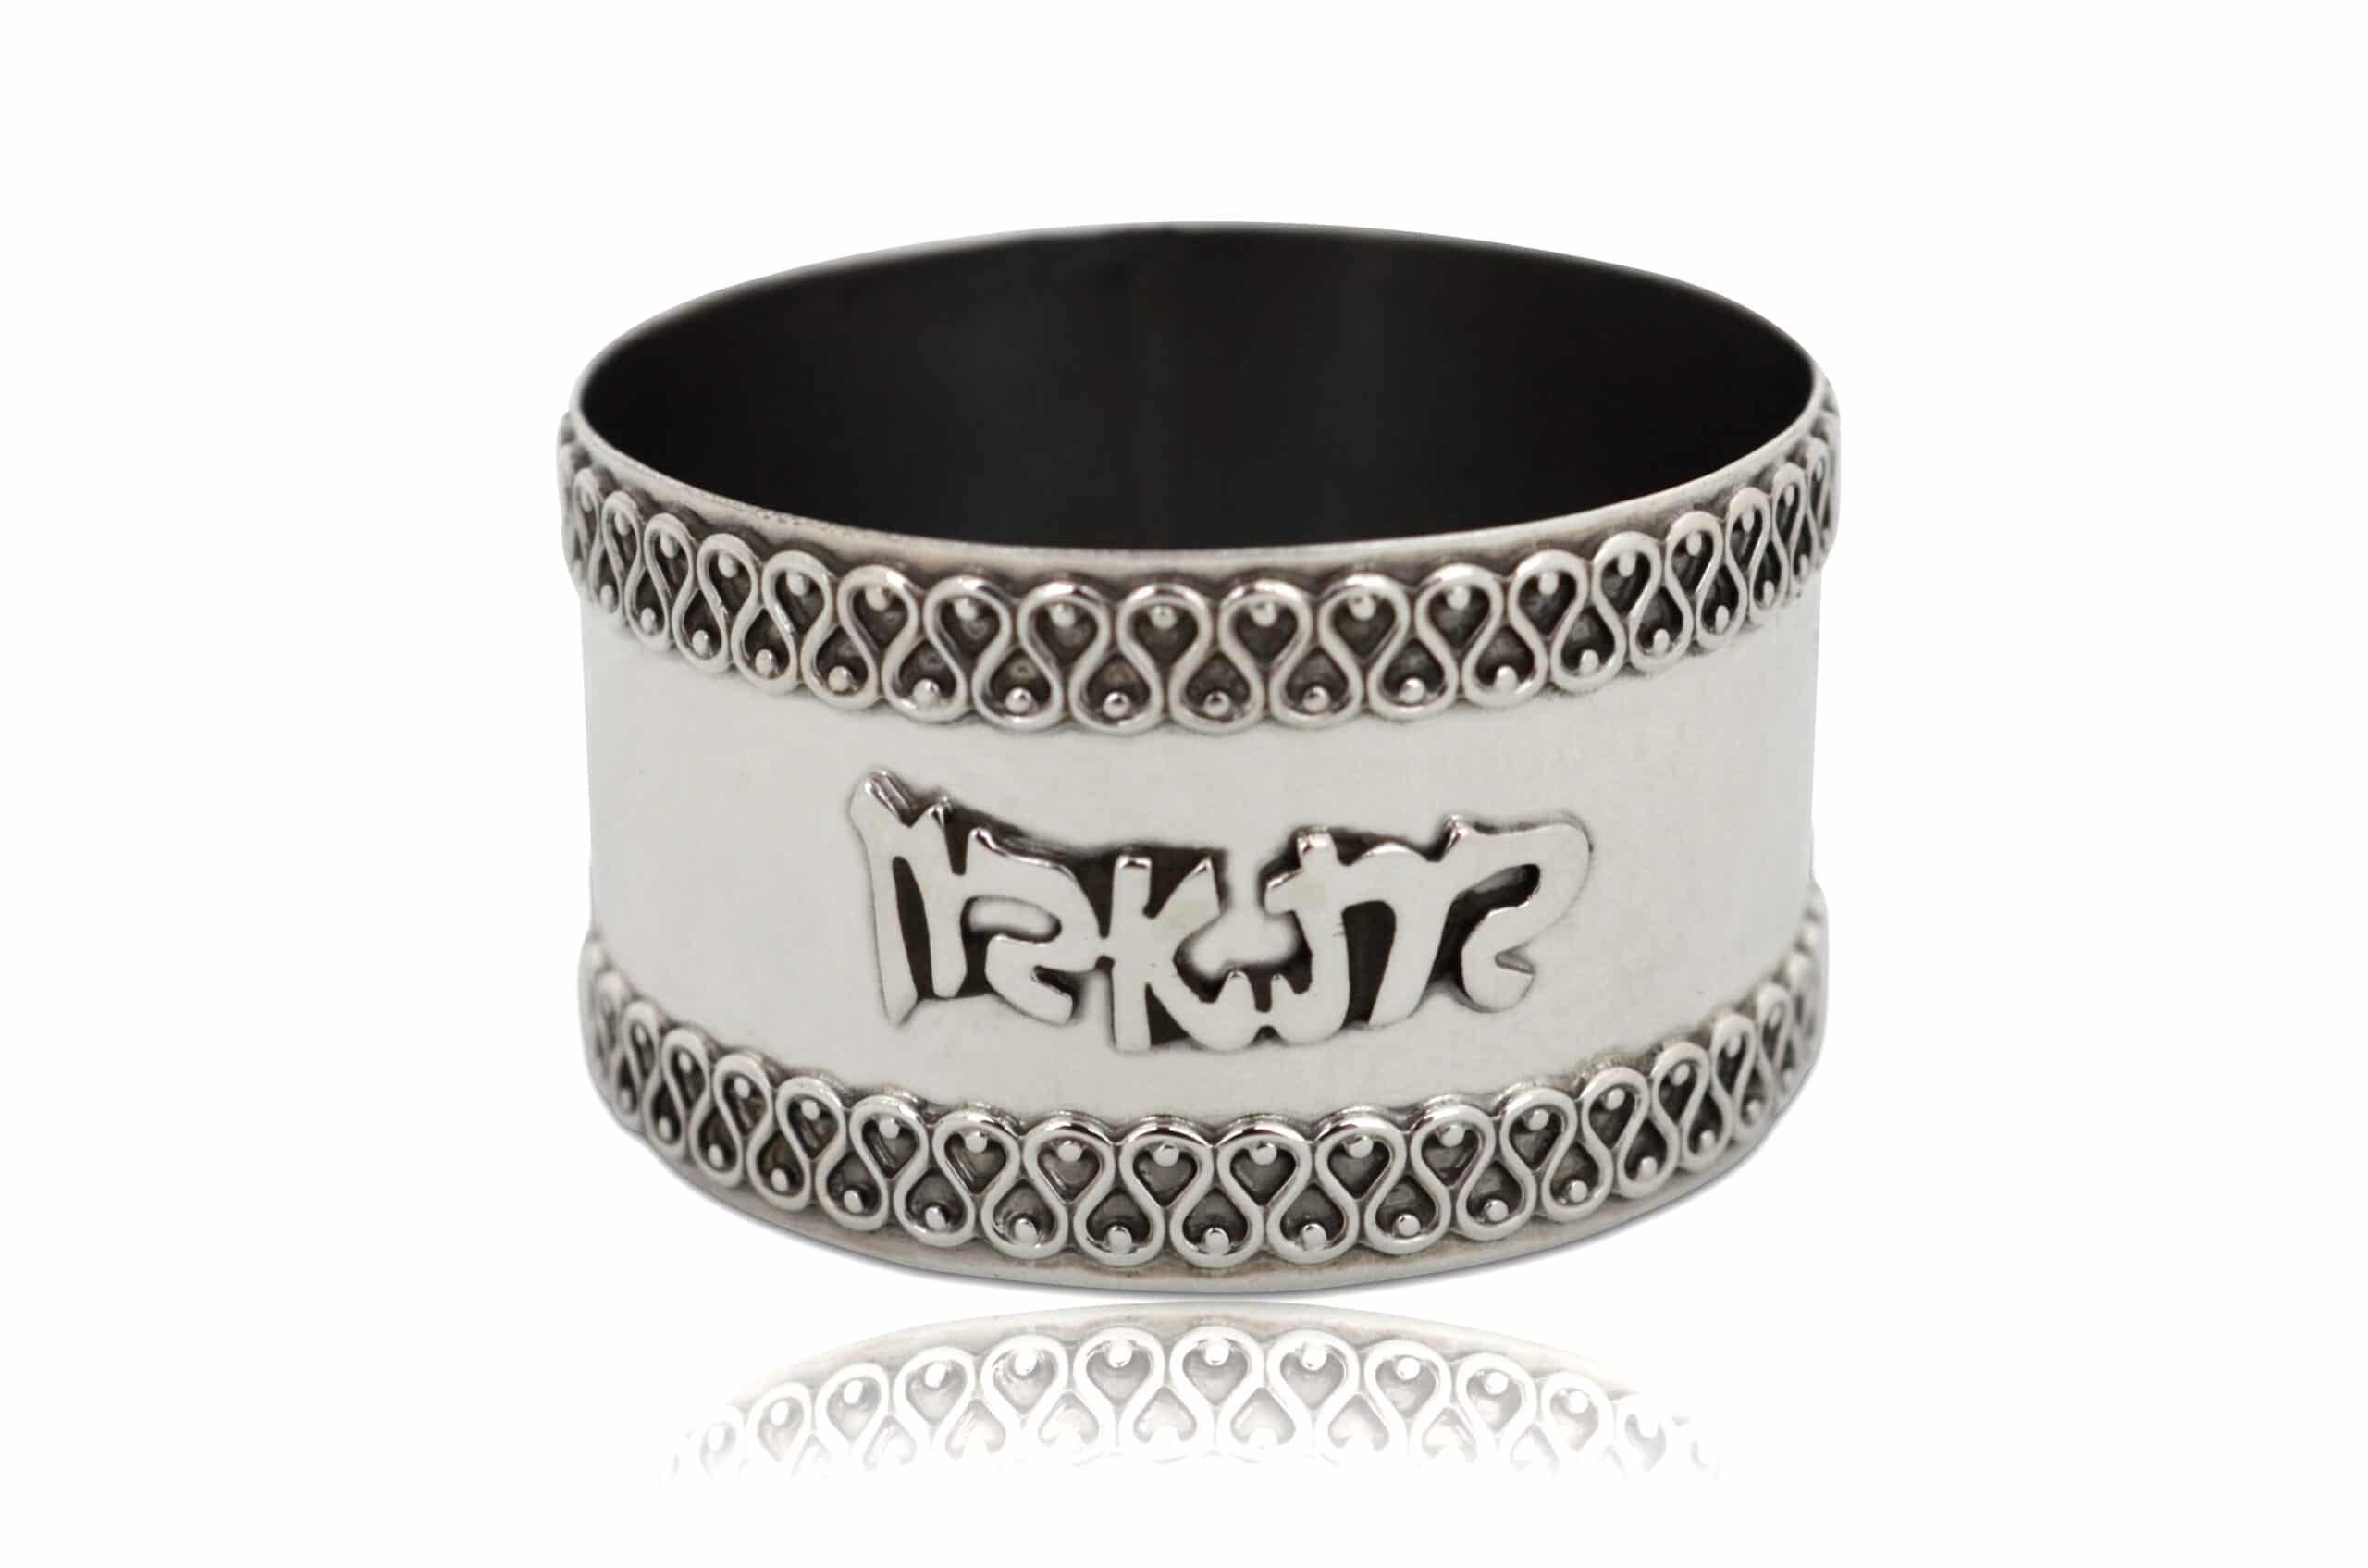 Napkin Rings Holder with Hebrew Lettering